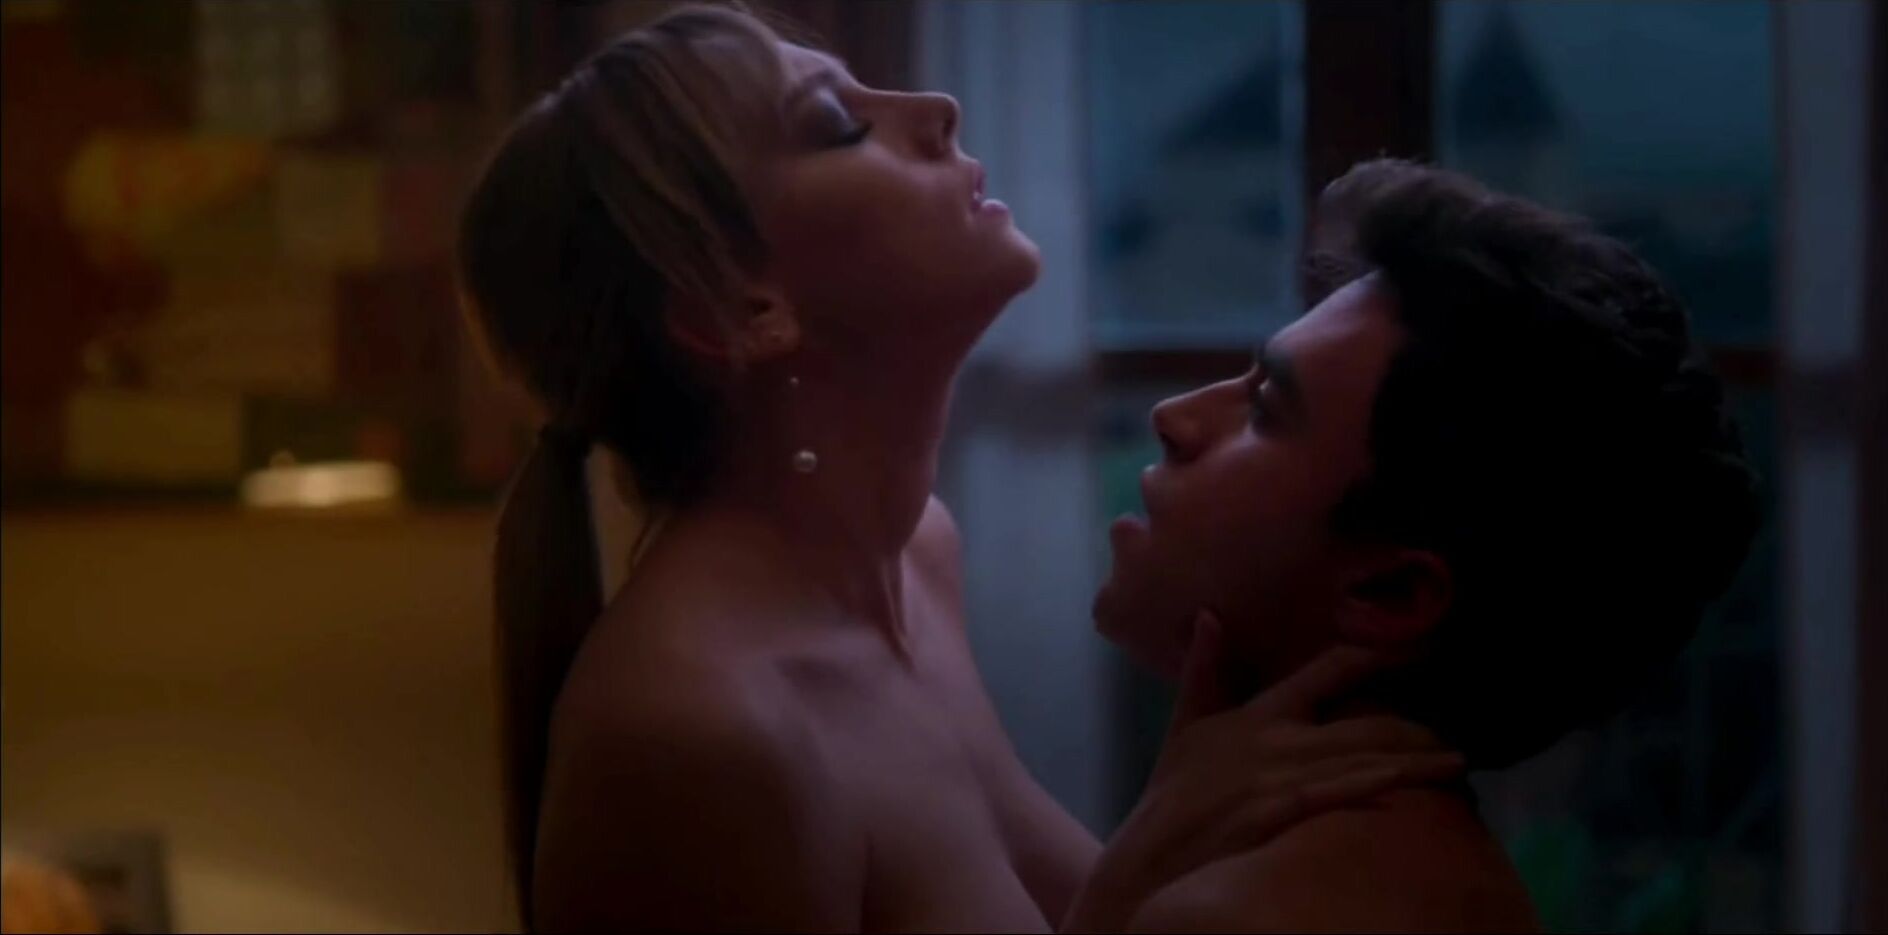 Gaysex Ester Exposito is fucked and exposed in TV series sex scenes from Elite S02E03 (2019) Female Orgasm